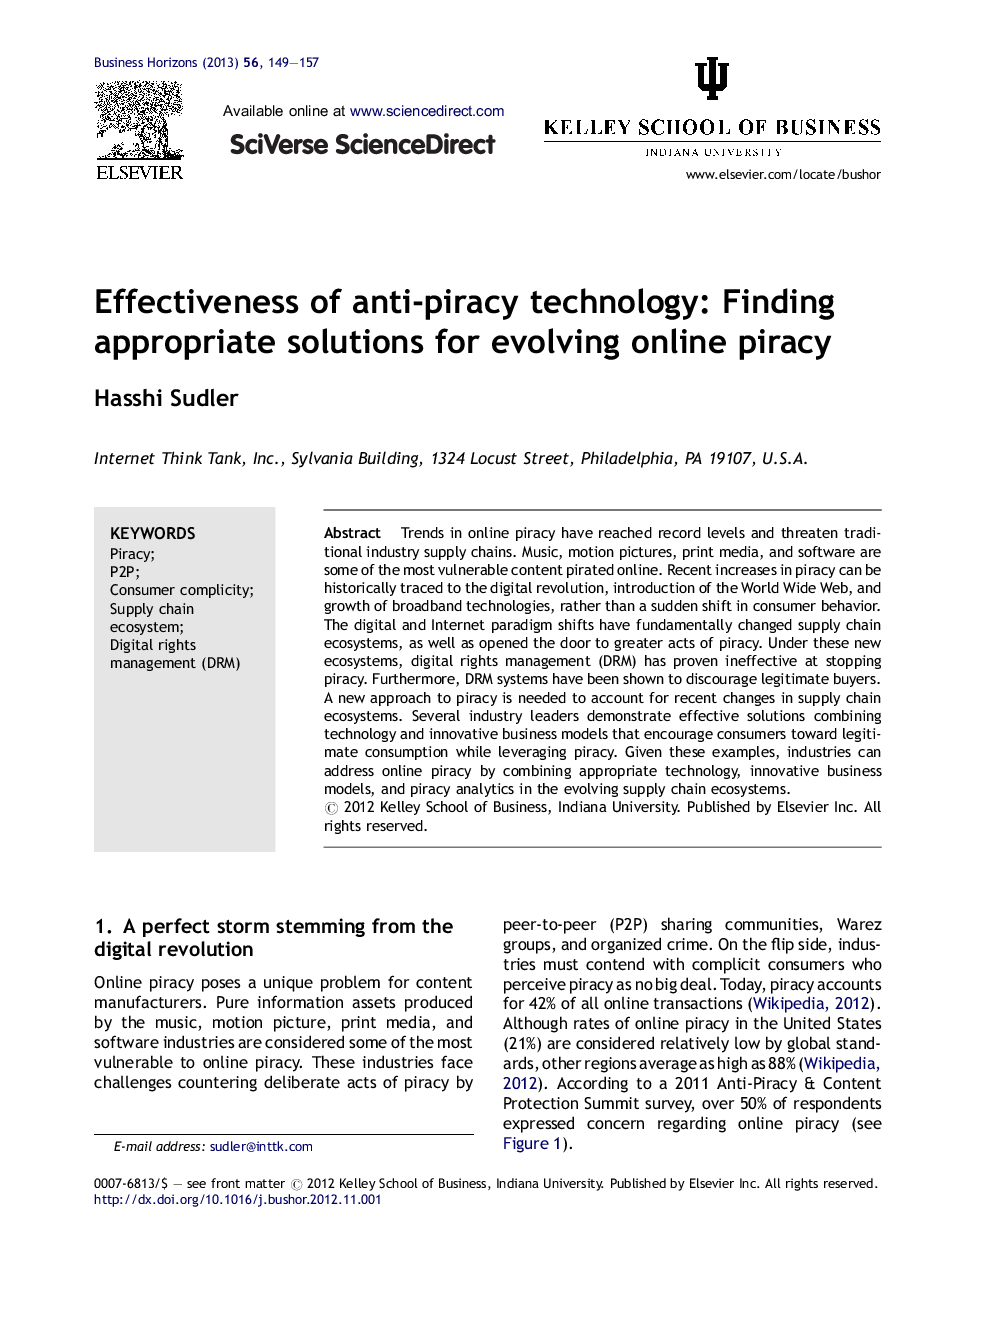 Effectiveness of anti-piracy technology: Finding appropriate solutions for evolving online piracy